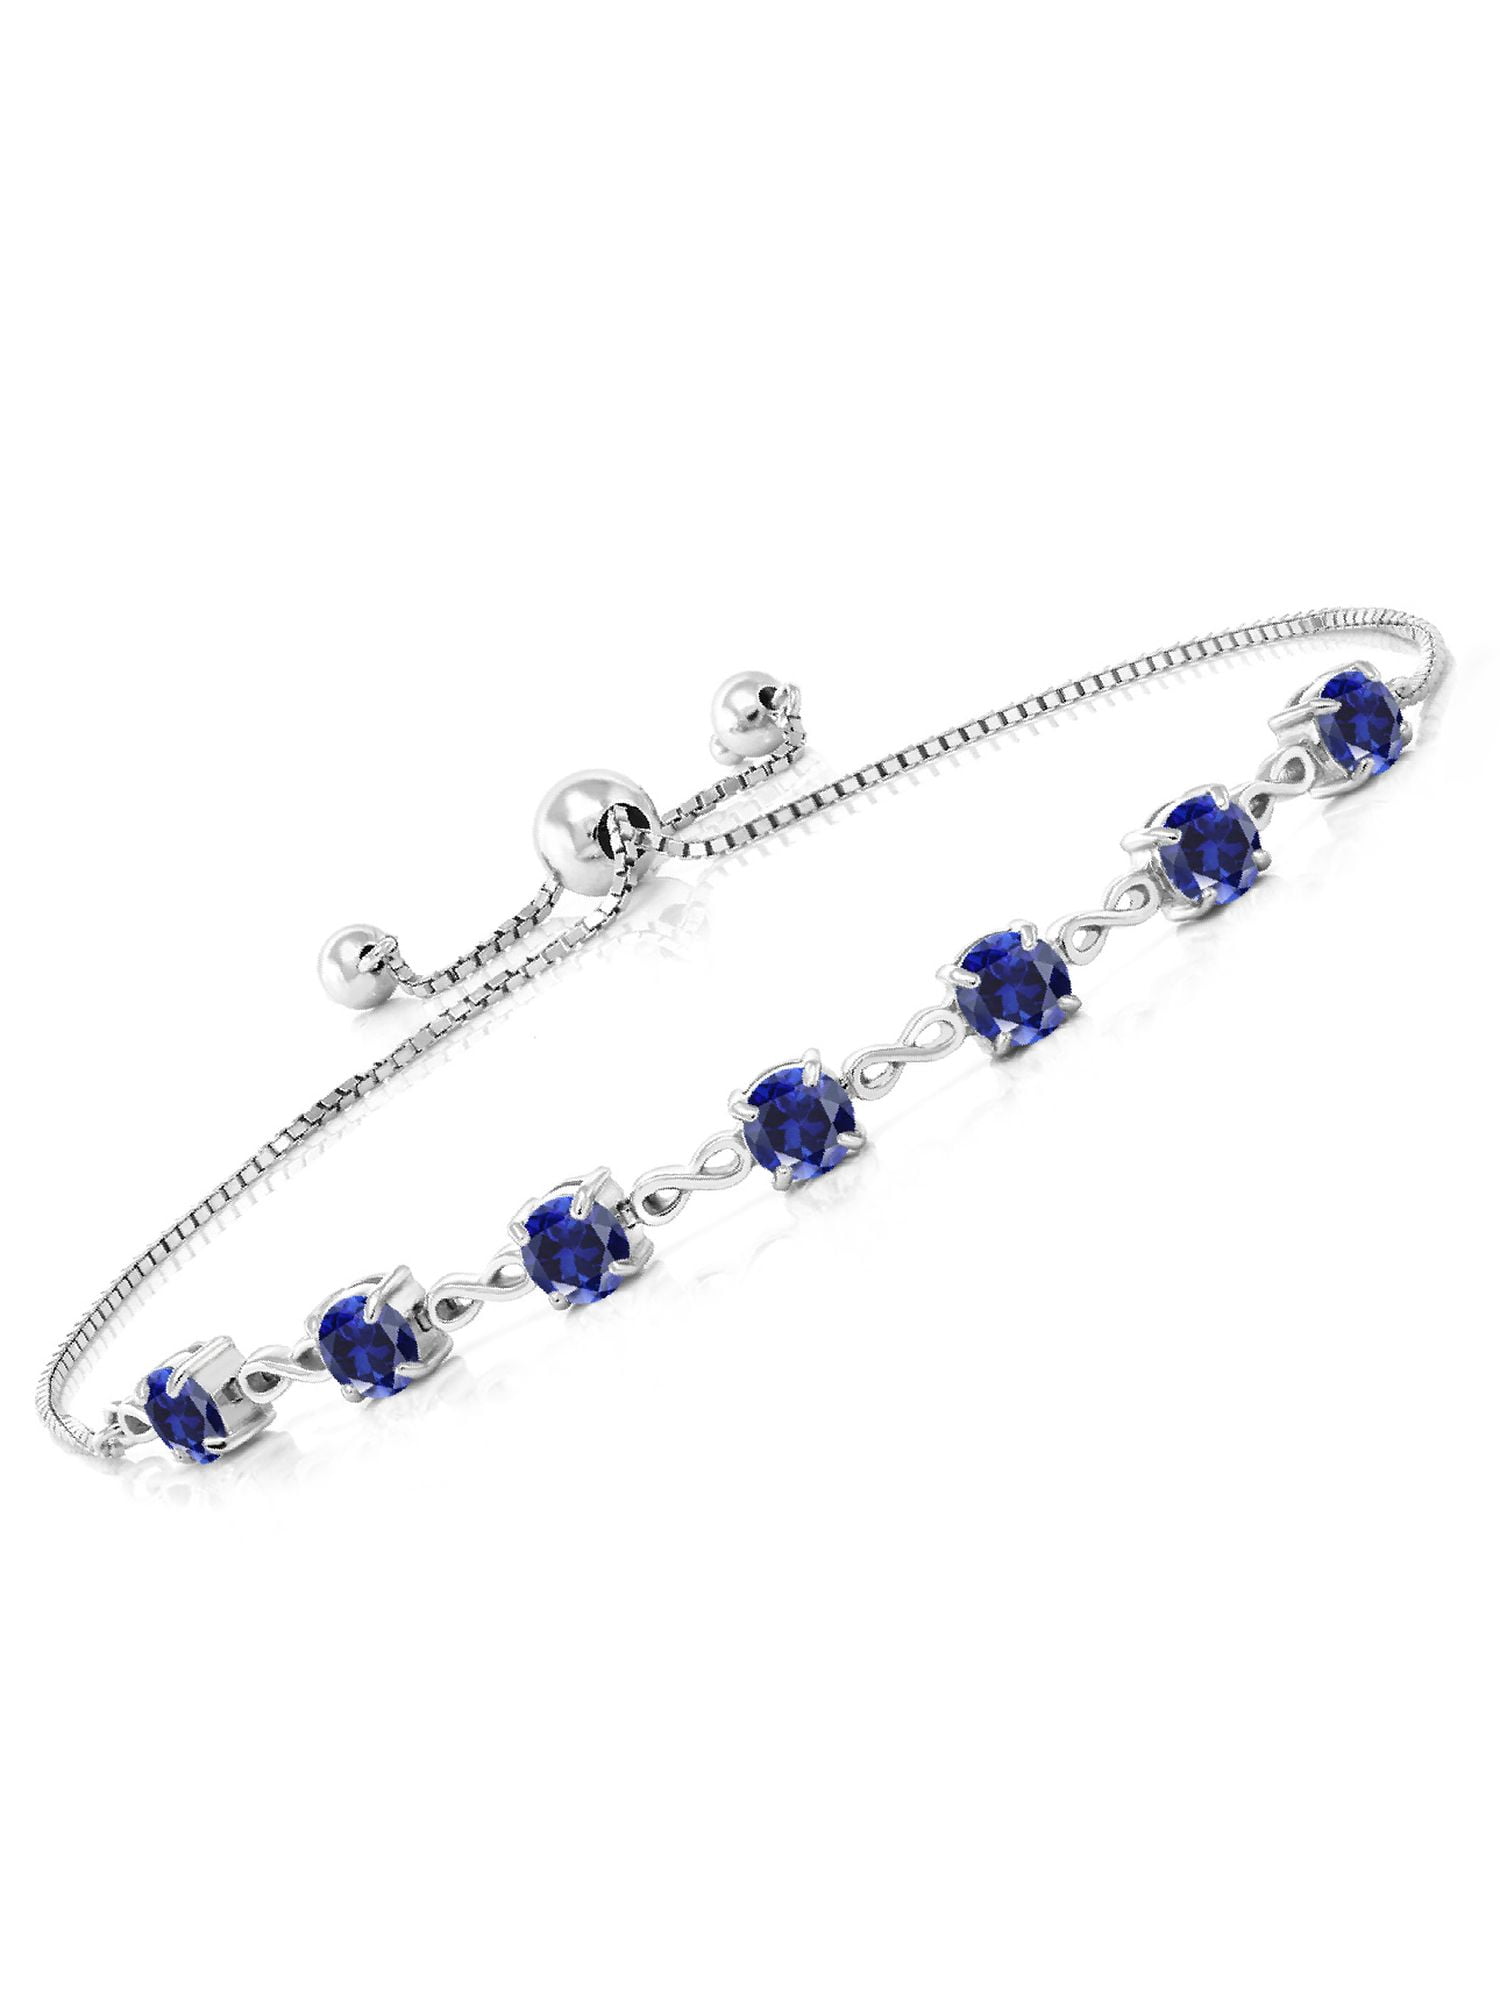 Bella Cavo Bracelet - Rhodium Finish Sterling Silver Cable Cuff Bracelet  with Name Plate and Simulated Blue Sapphire Birth Gems - September - by  Kelly Waters - Neustaedter's Fine Jewelry St. Louis